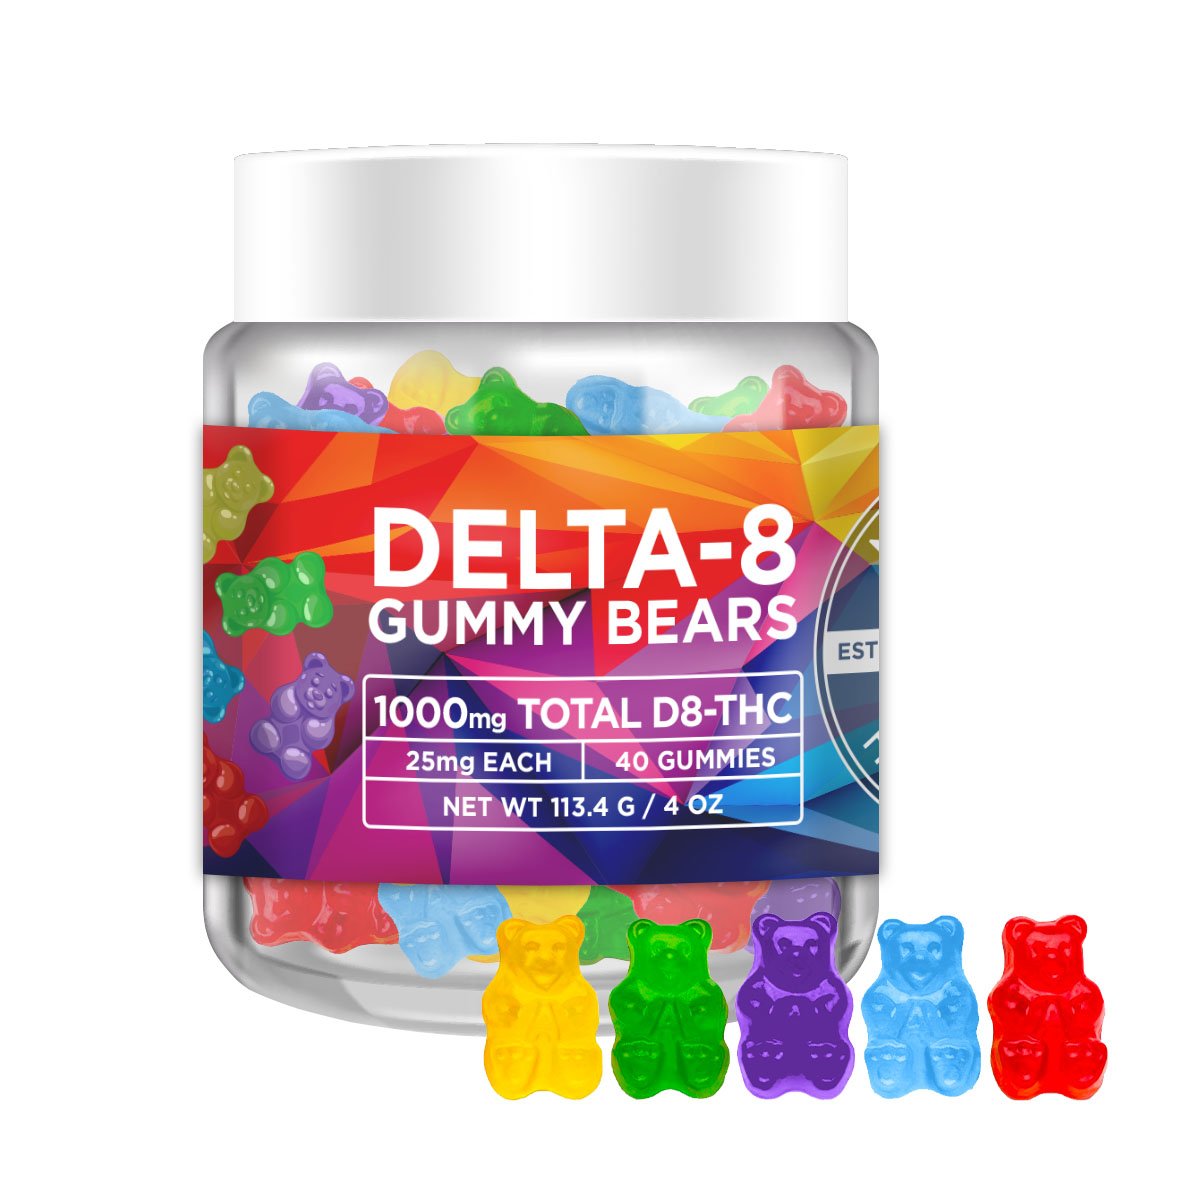 How Delta 8 Gummies work and effects on the body?